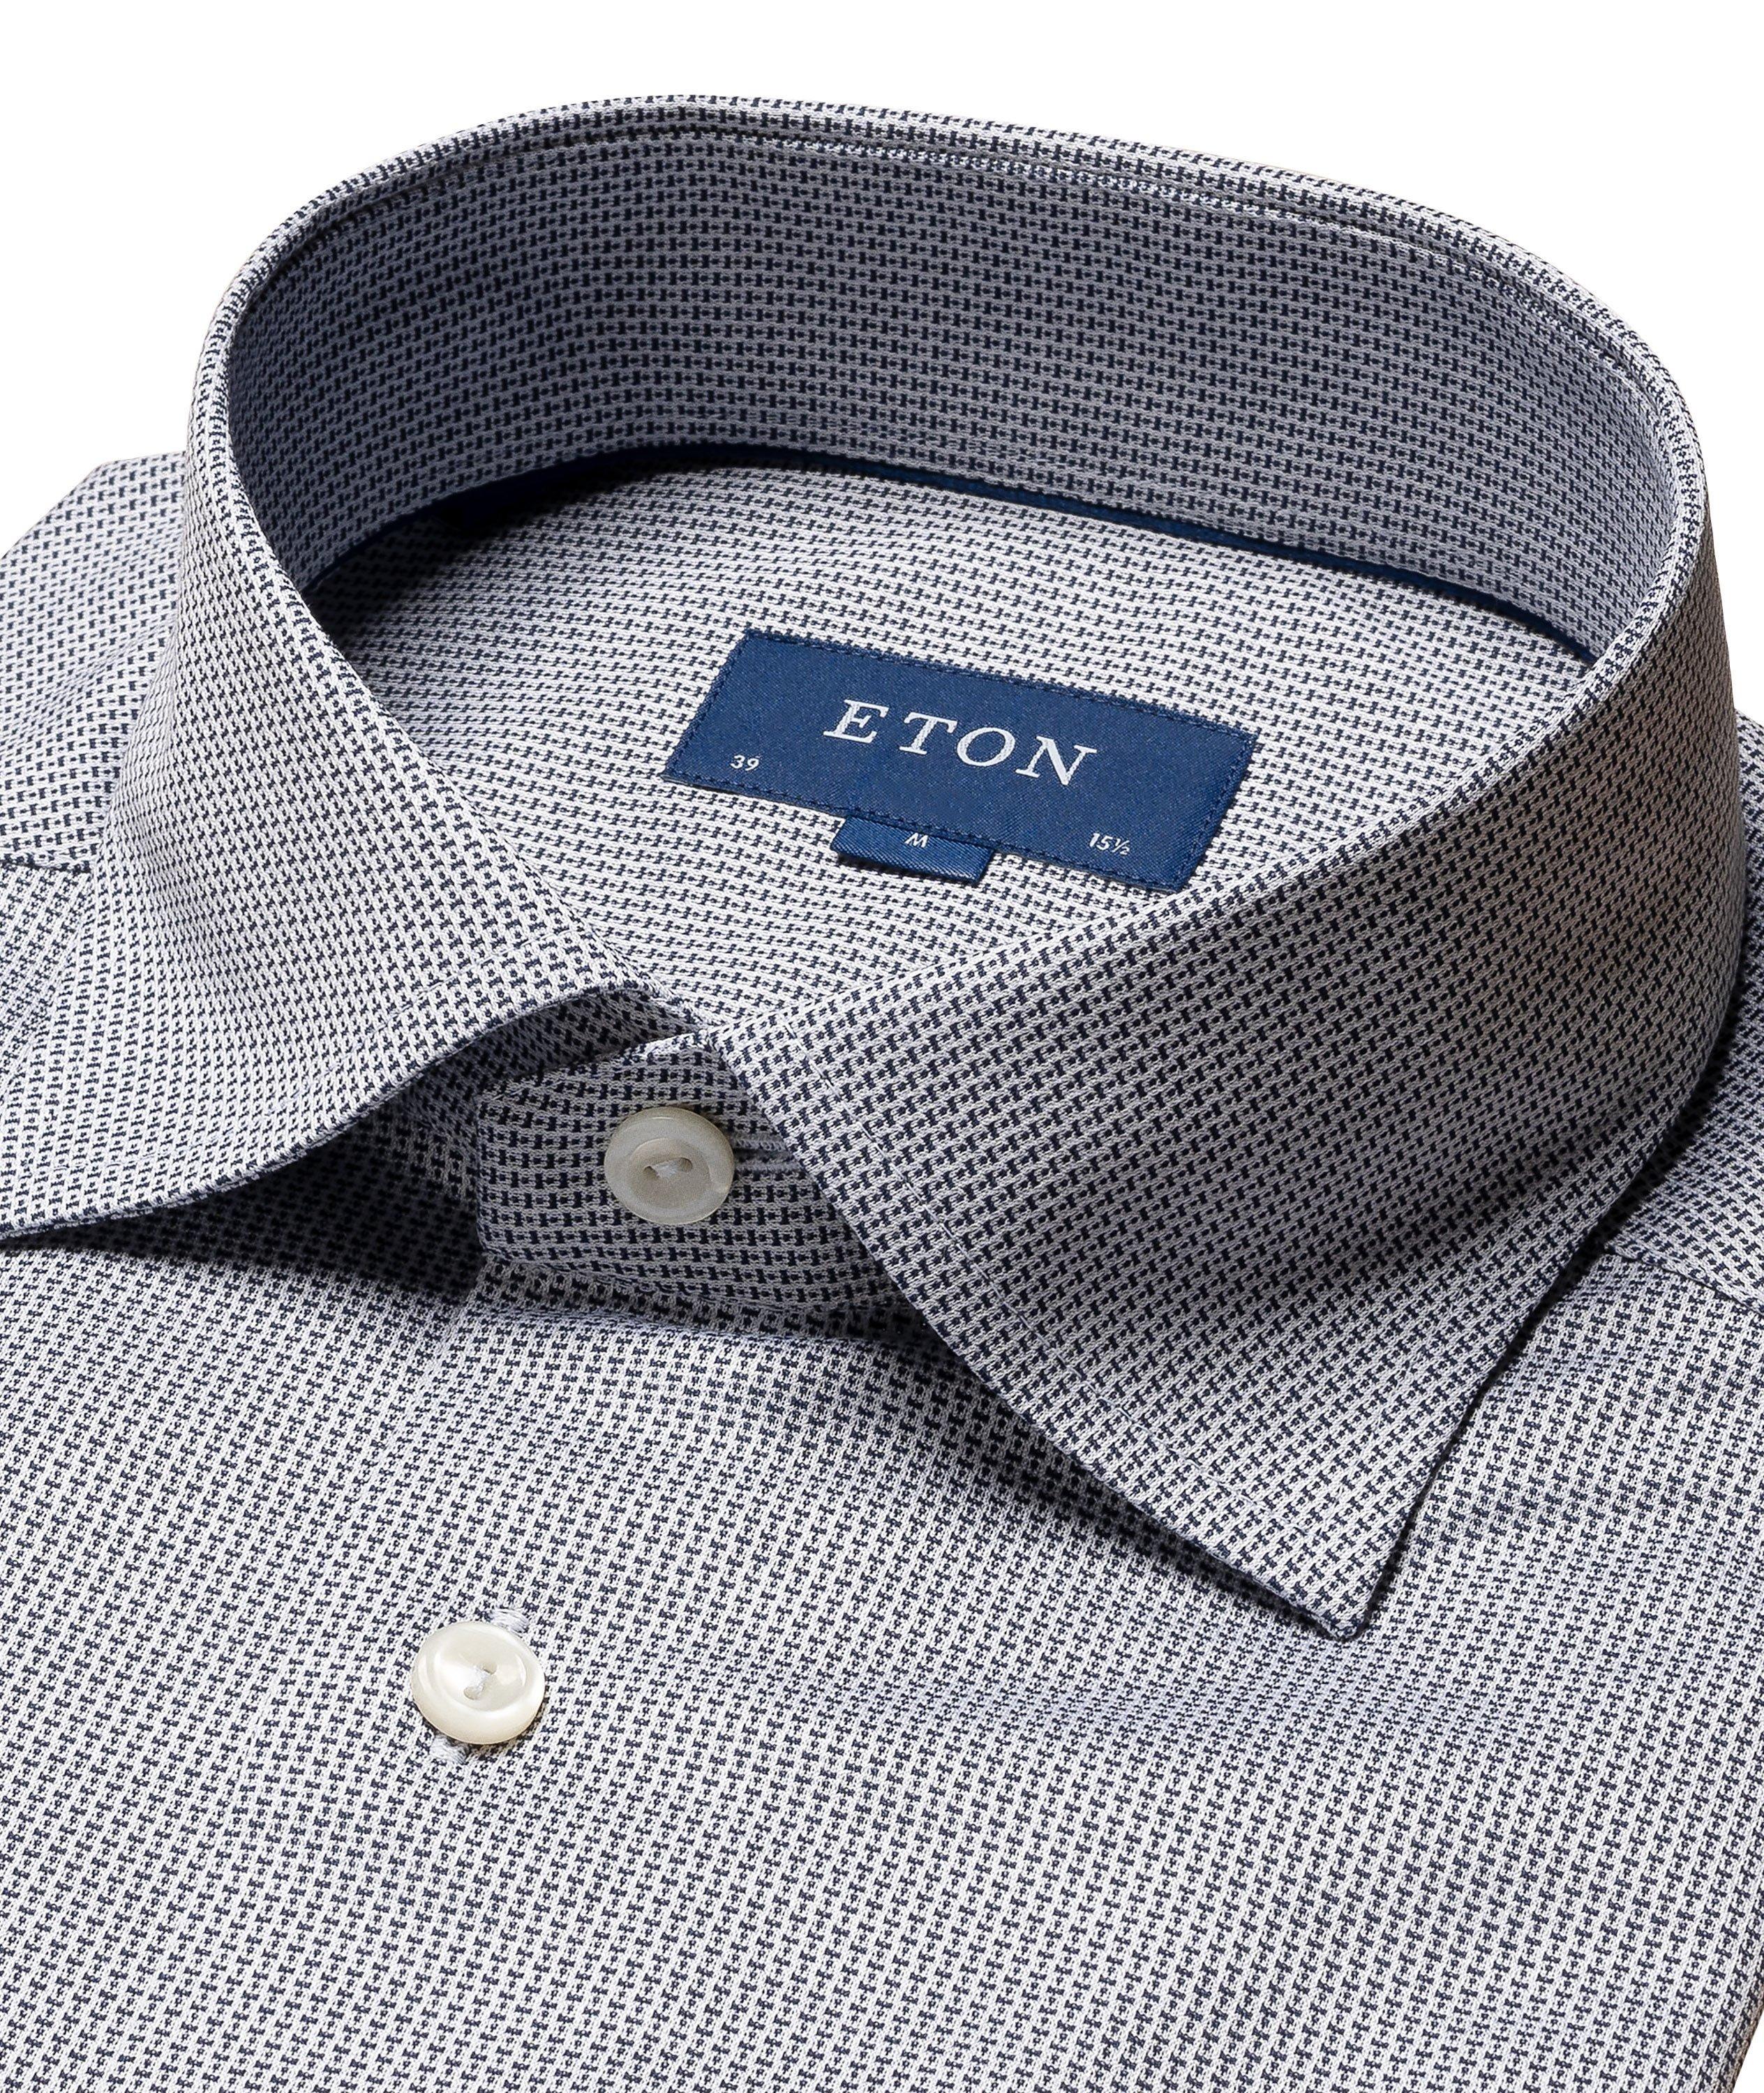 Slim Fit Luxe Knit Dress Shirt image 1